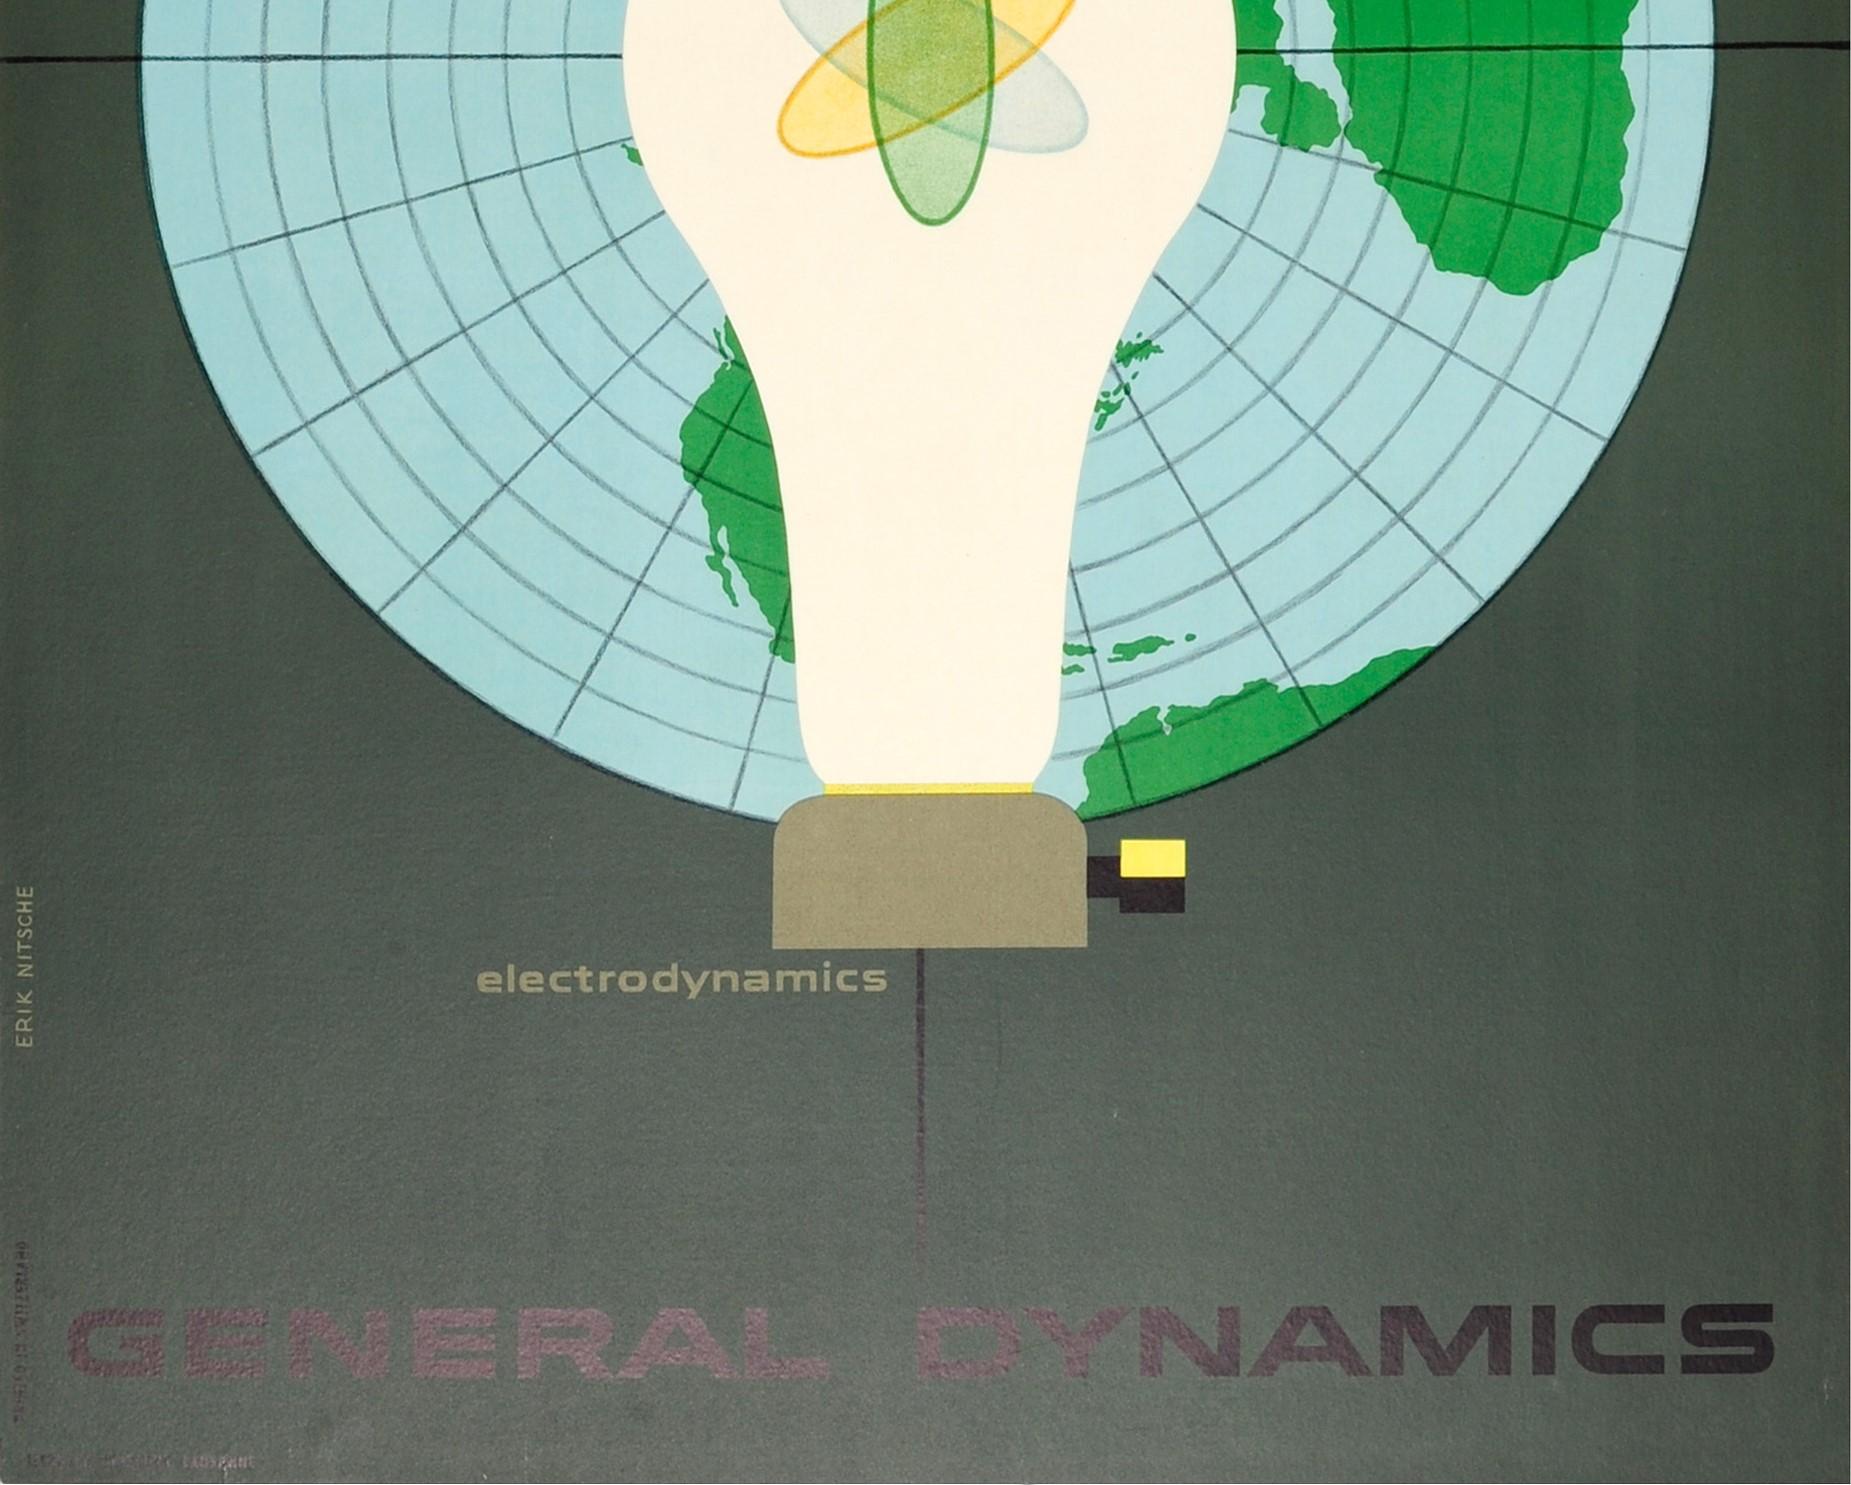 Original Vintage General Dynamics Poster Electrodynamics Atoms for Peace Nitsche In Good Condition In London, GB